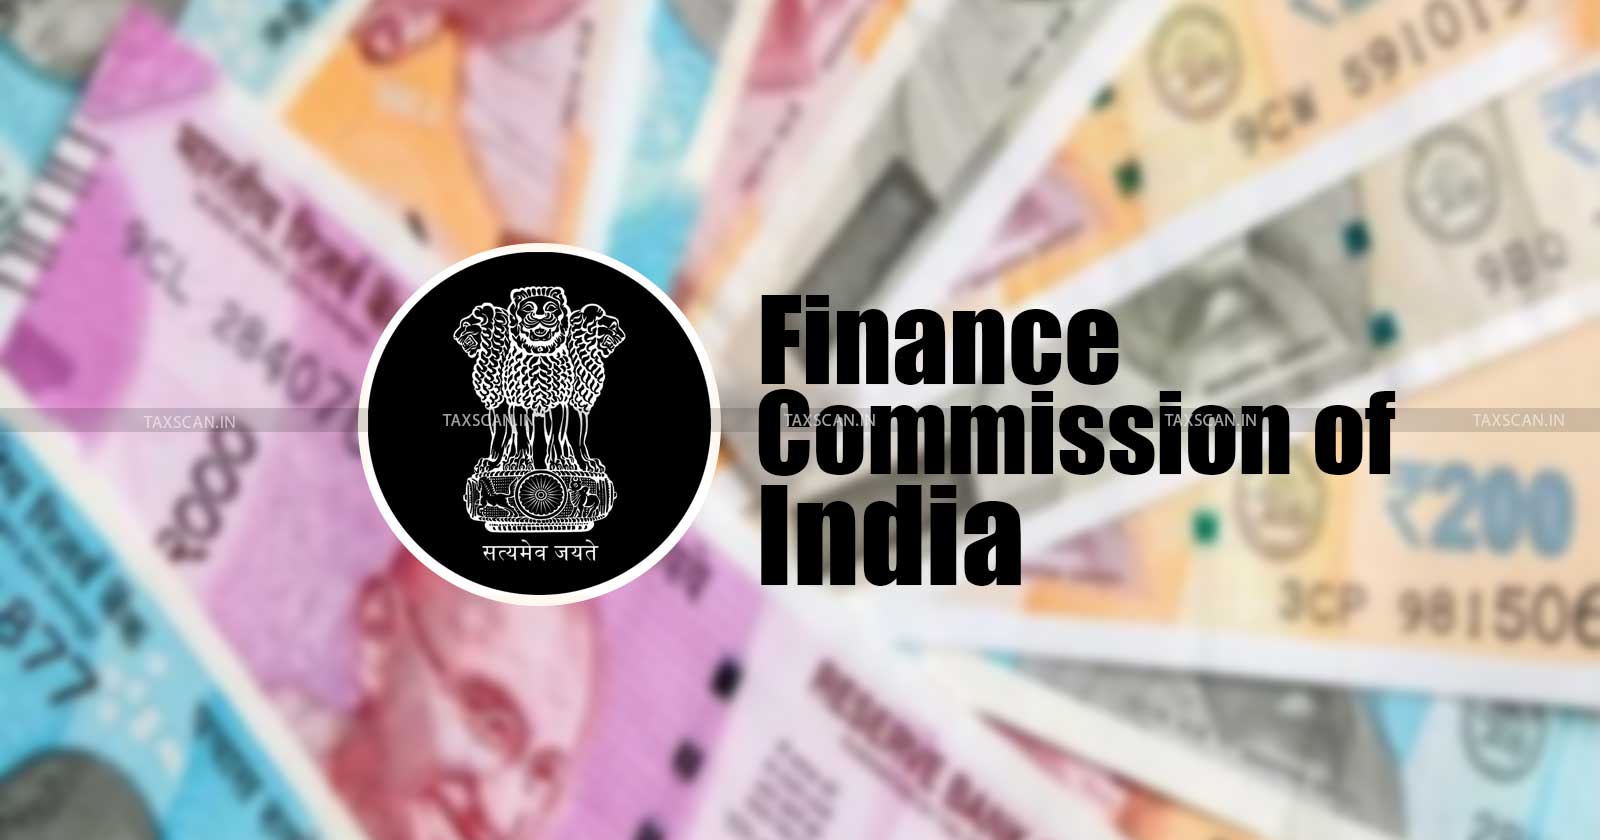 Cabinet approves Creation - 16th Finance Commission - TAXSCAN